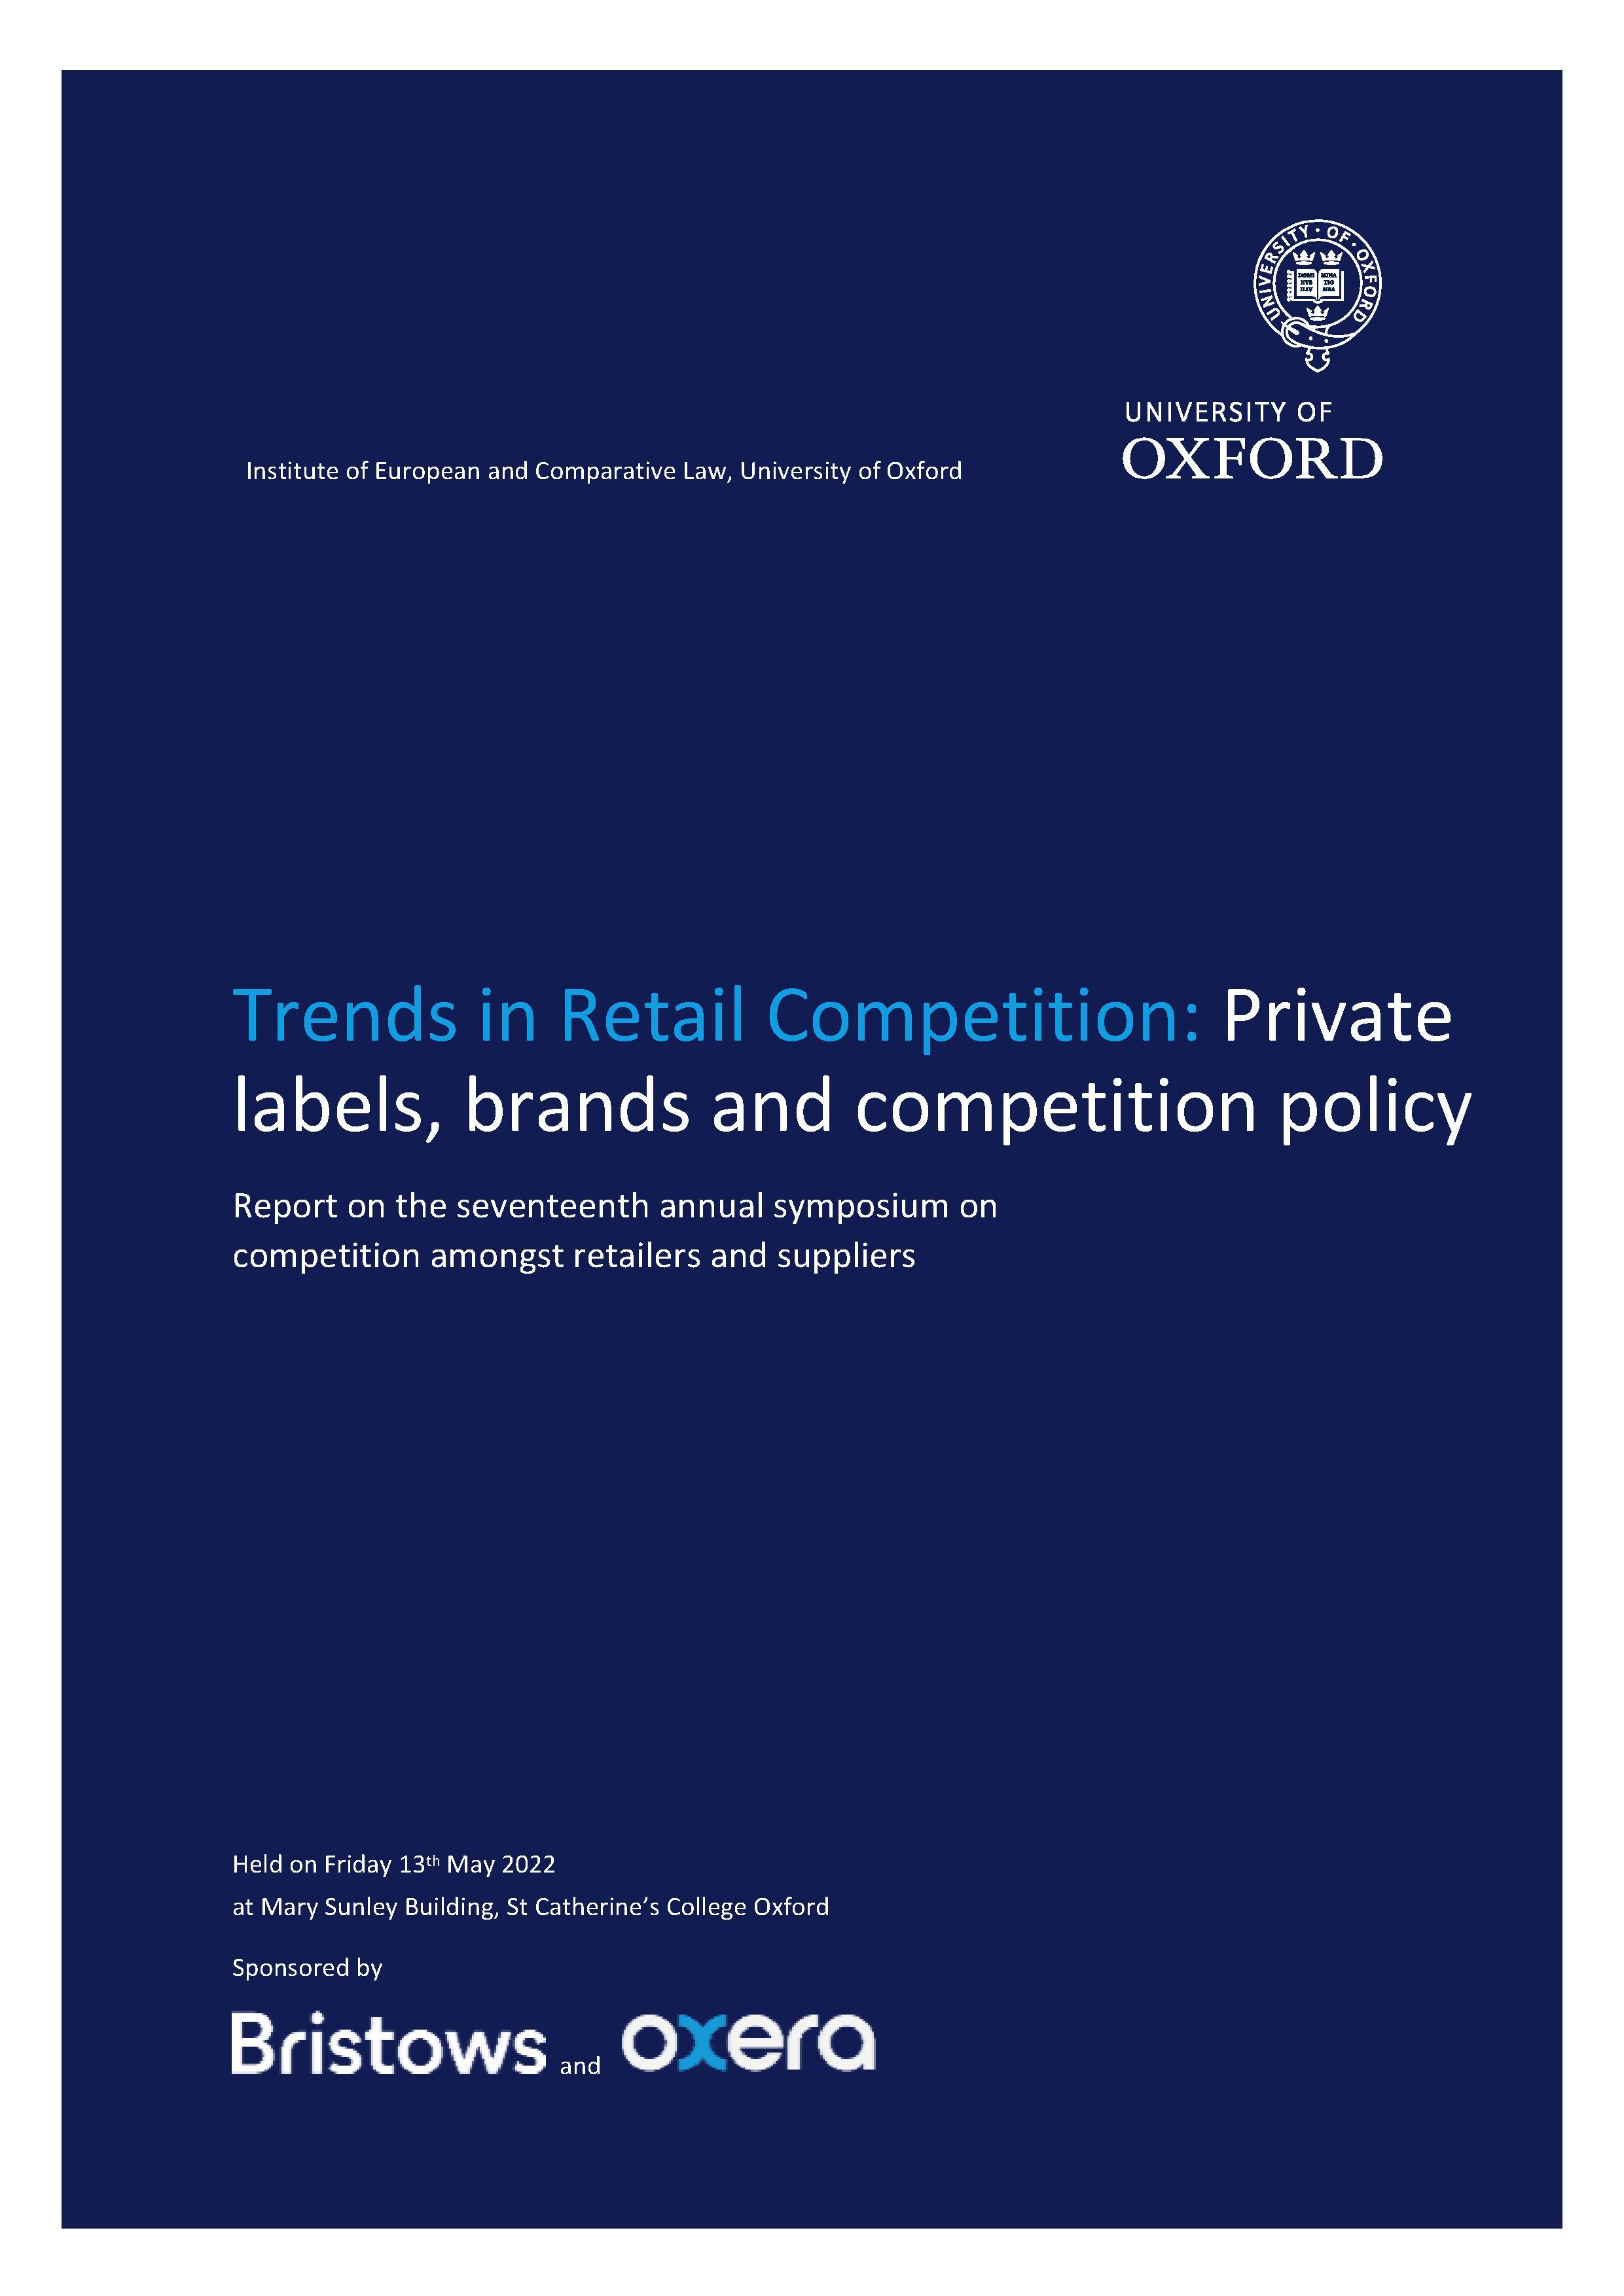 Brands in Retail Competition